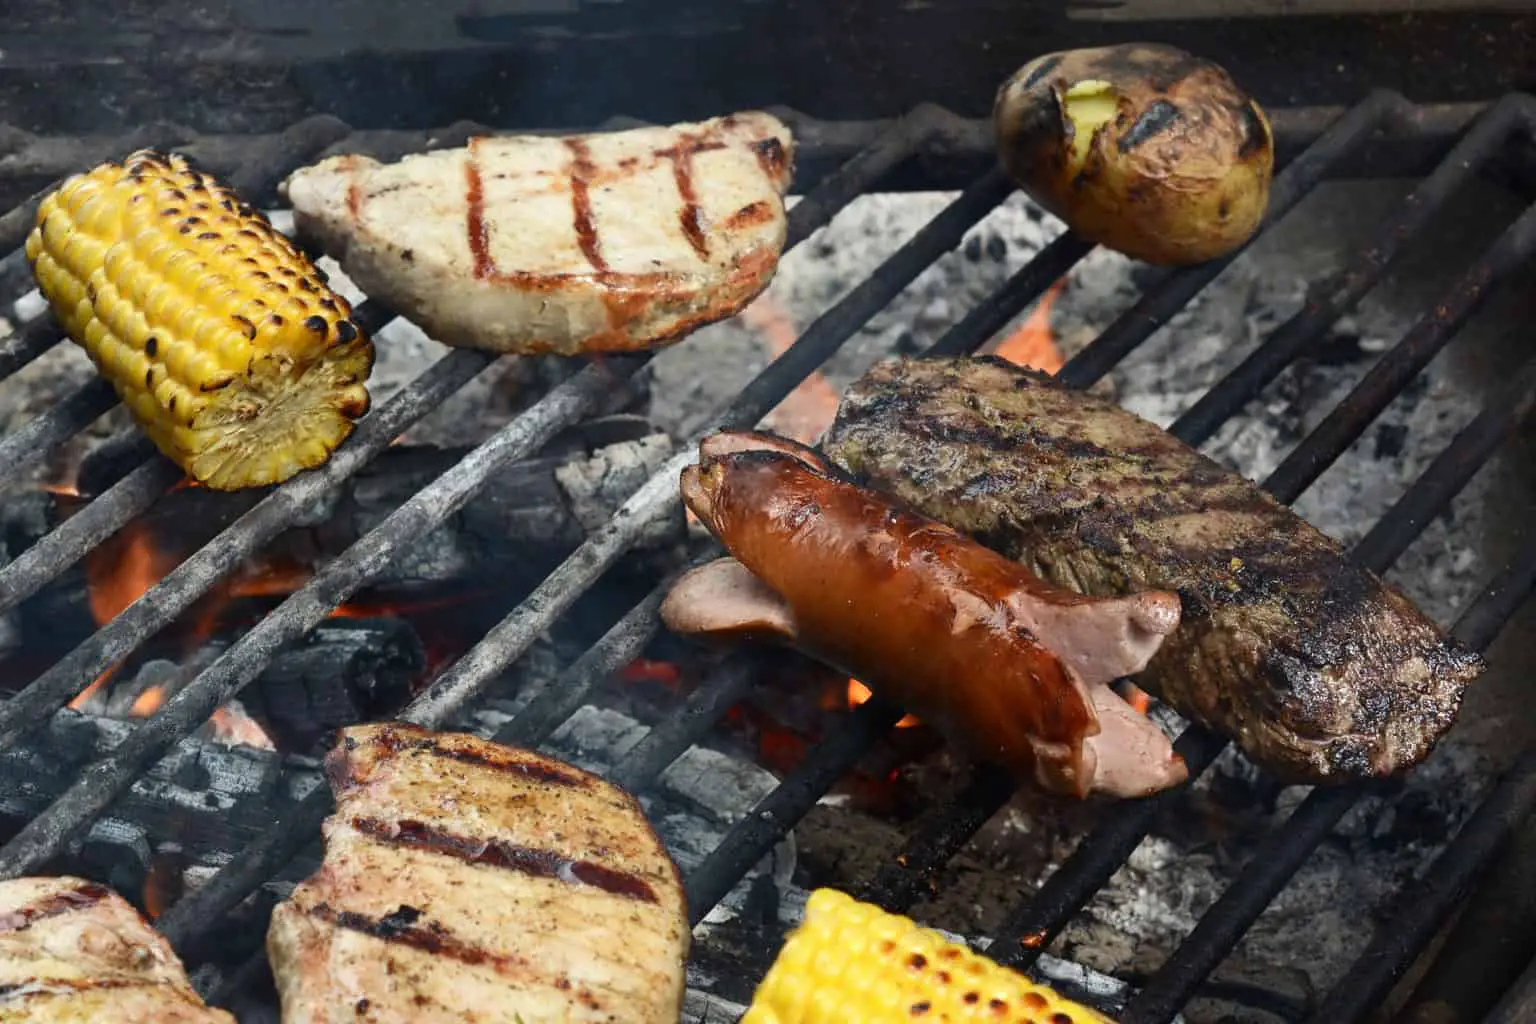 How To Use Charcoal Grill For Beginners